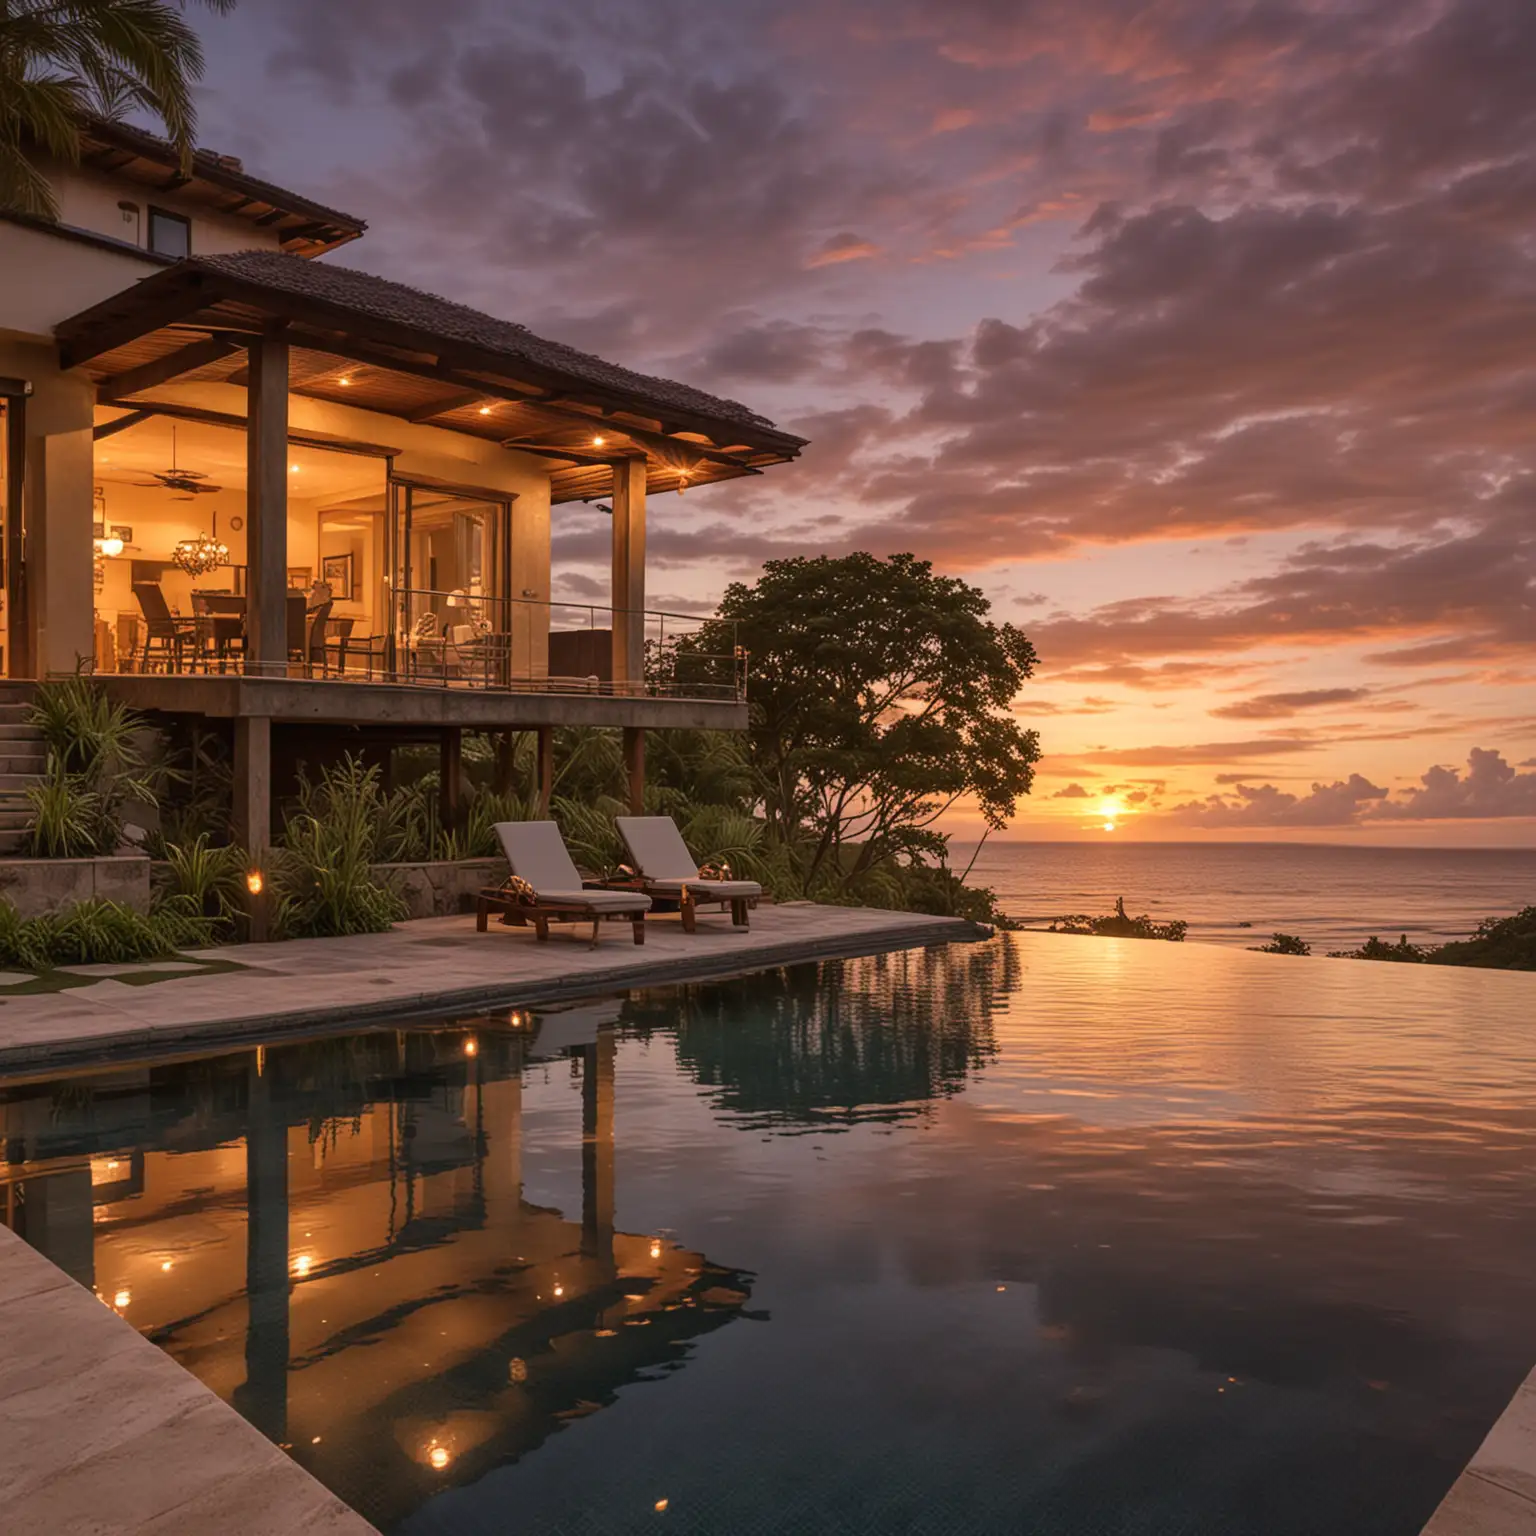 please create a photo of a ocean front property in costa rica with an infinity pool and outdoor living spaces at sunset with warm lighting.